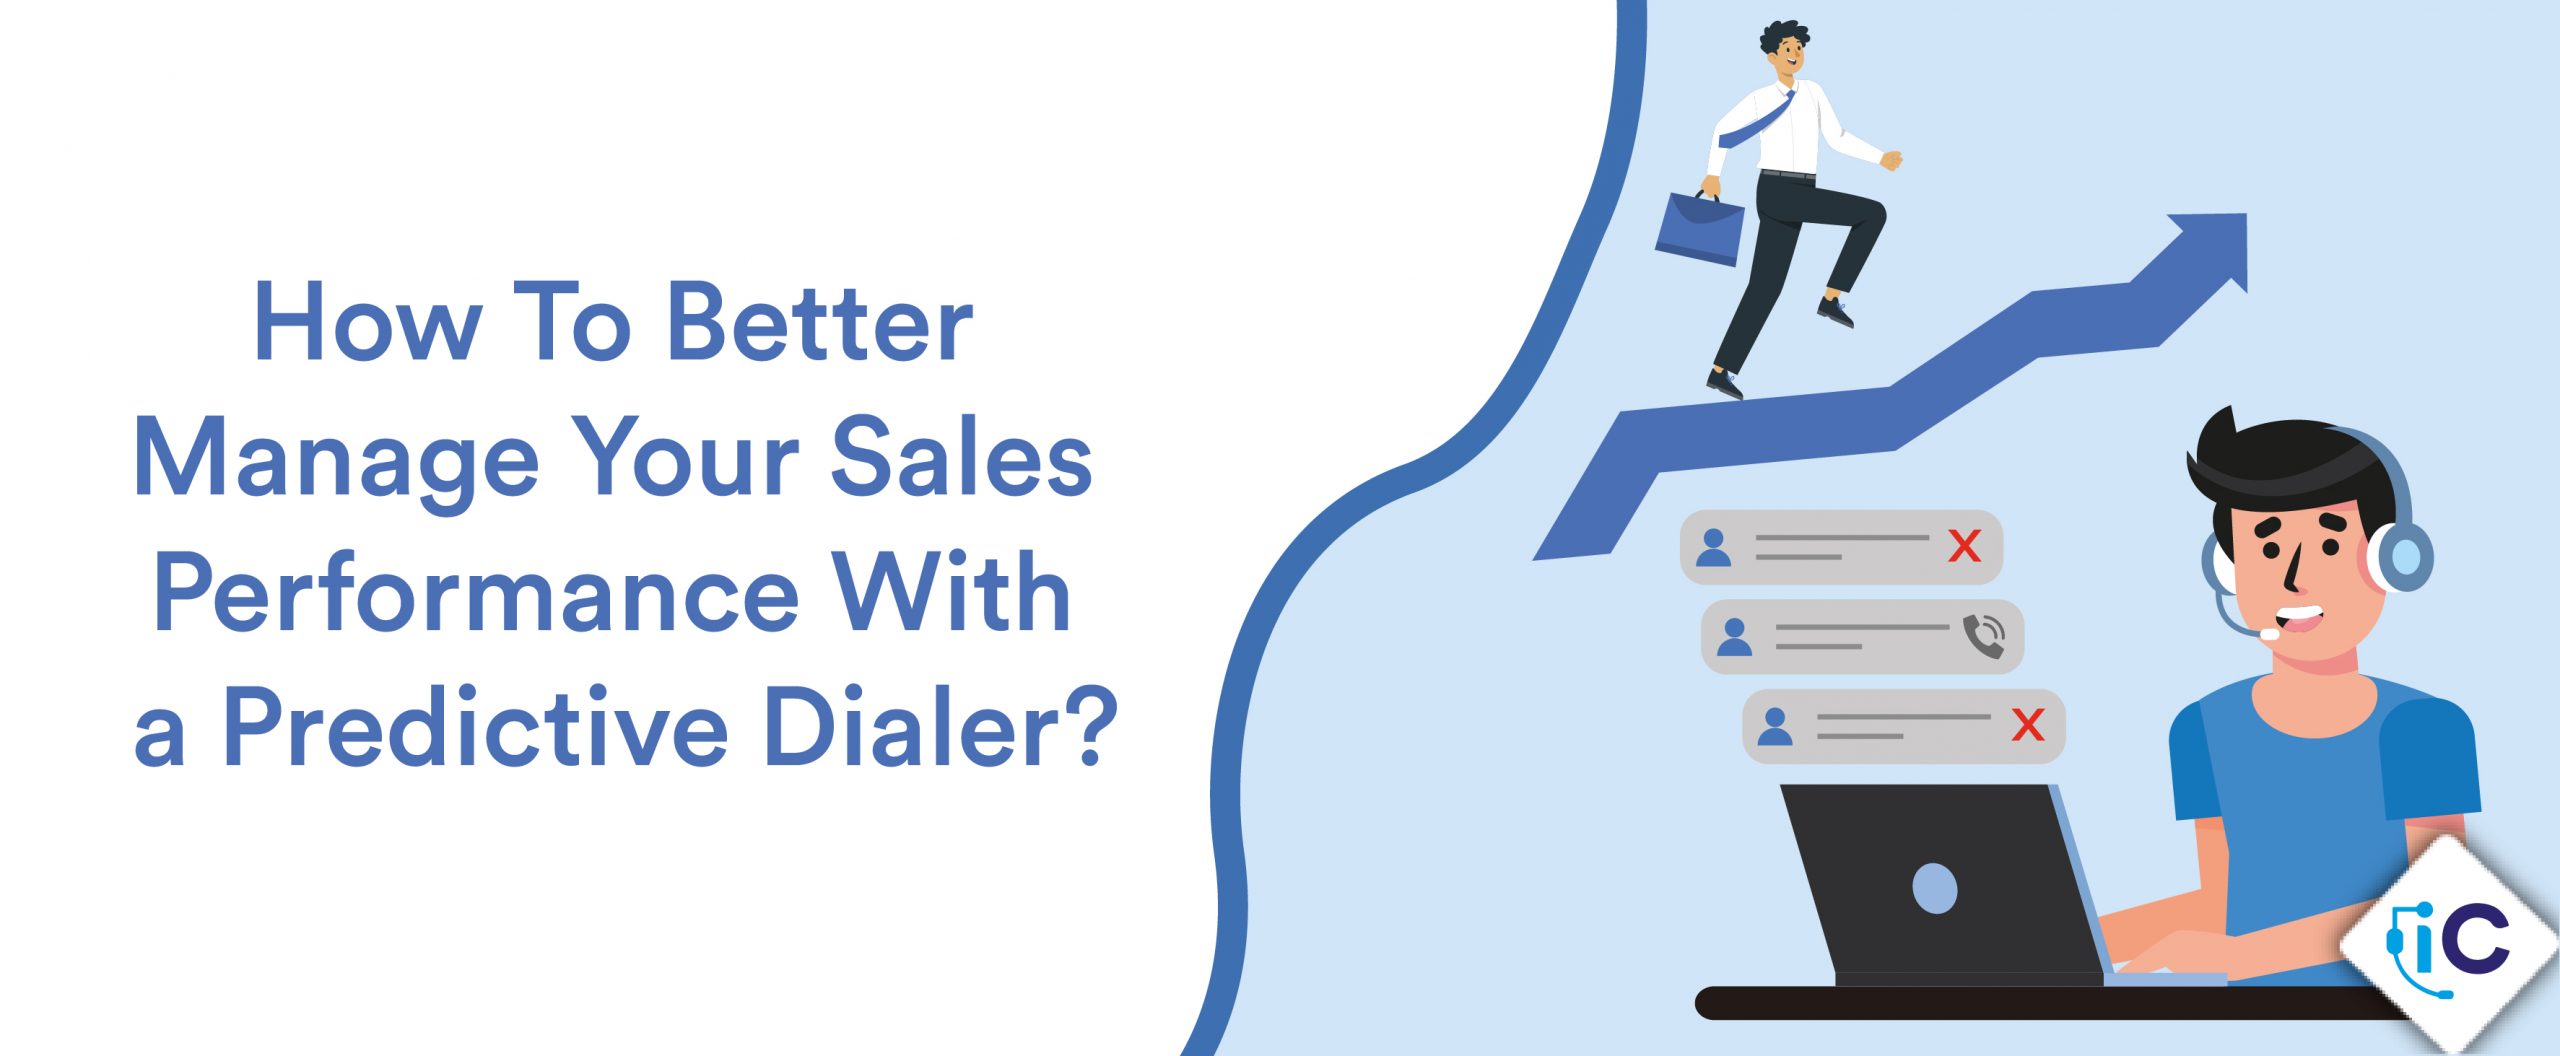 How to Better Manage Your Sales Performance with a Predictive Dialer?